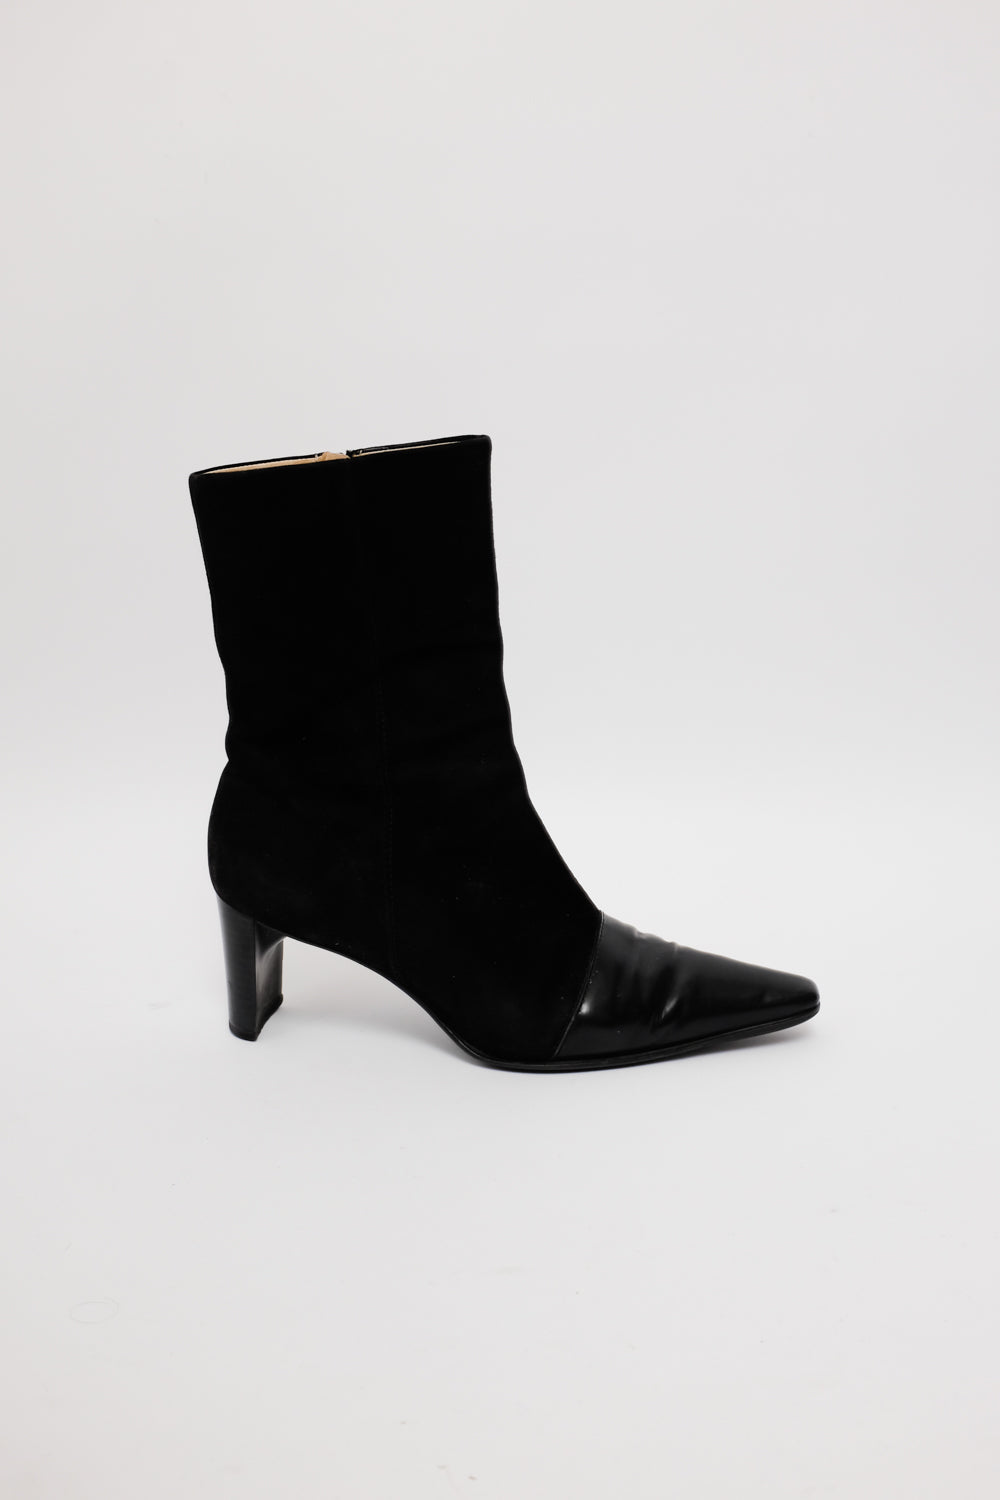 BLACK POINTY SUEDE LEATHER BOOTS 40